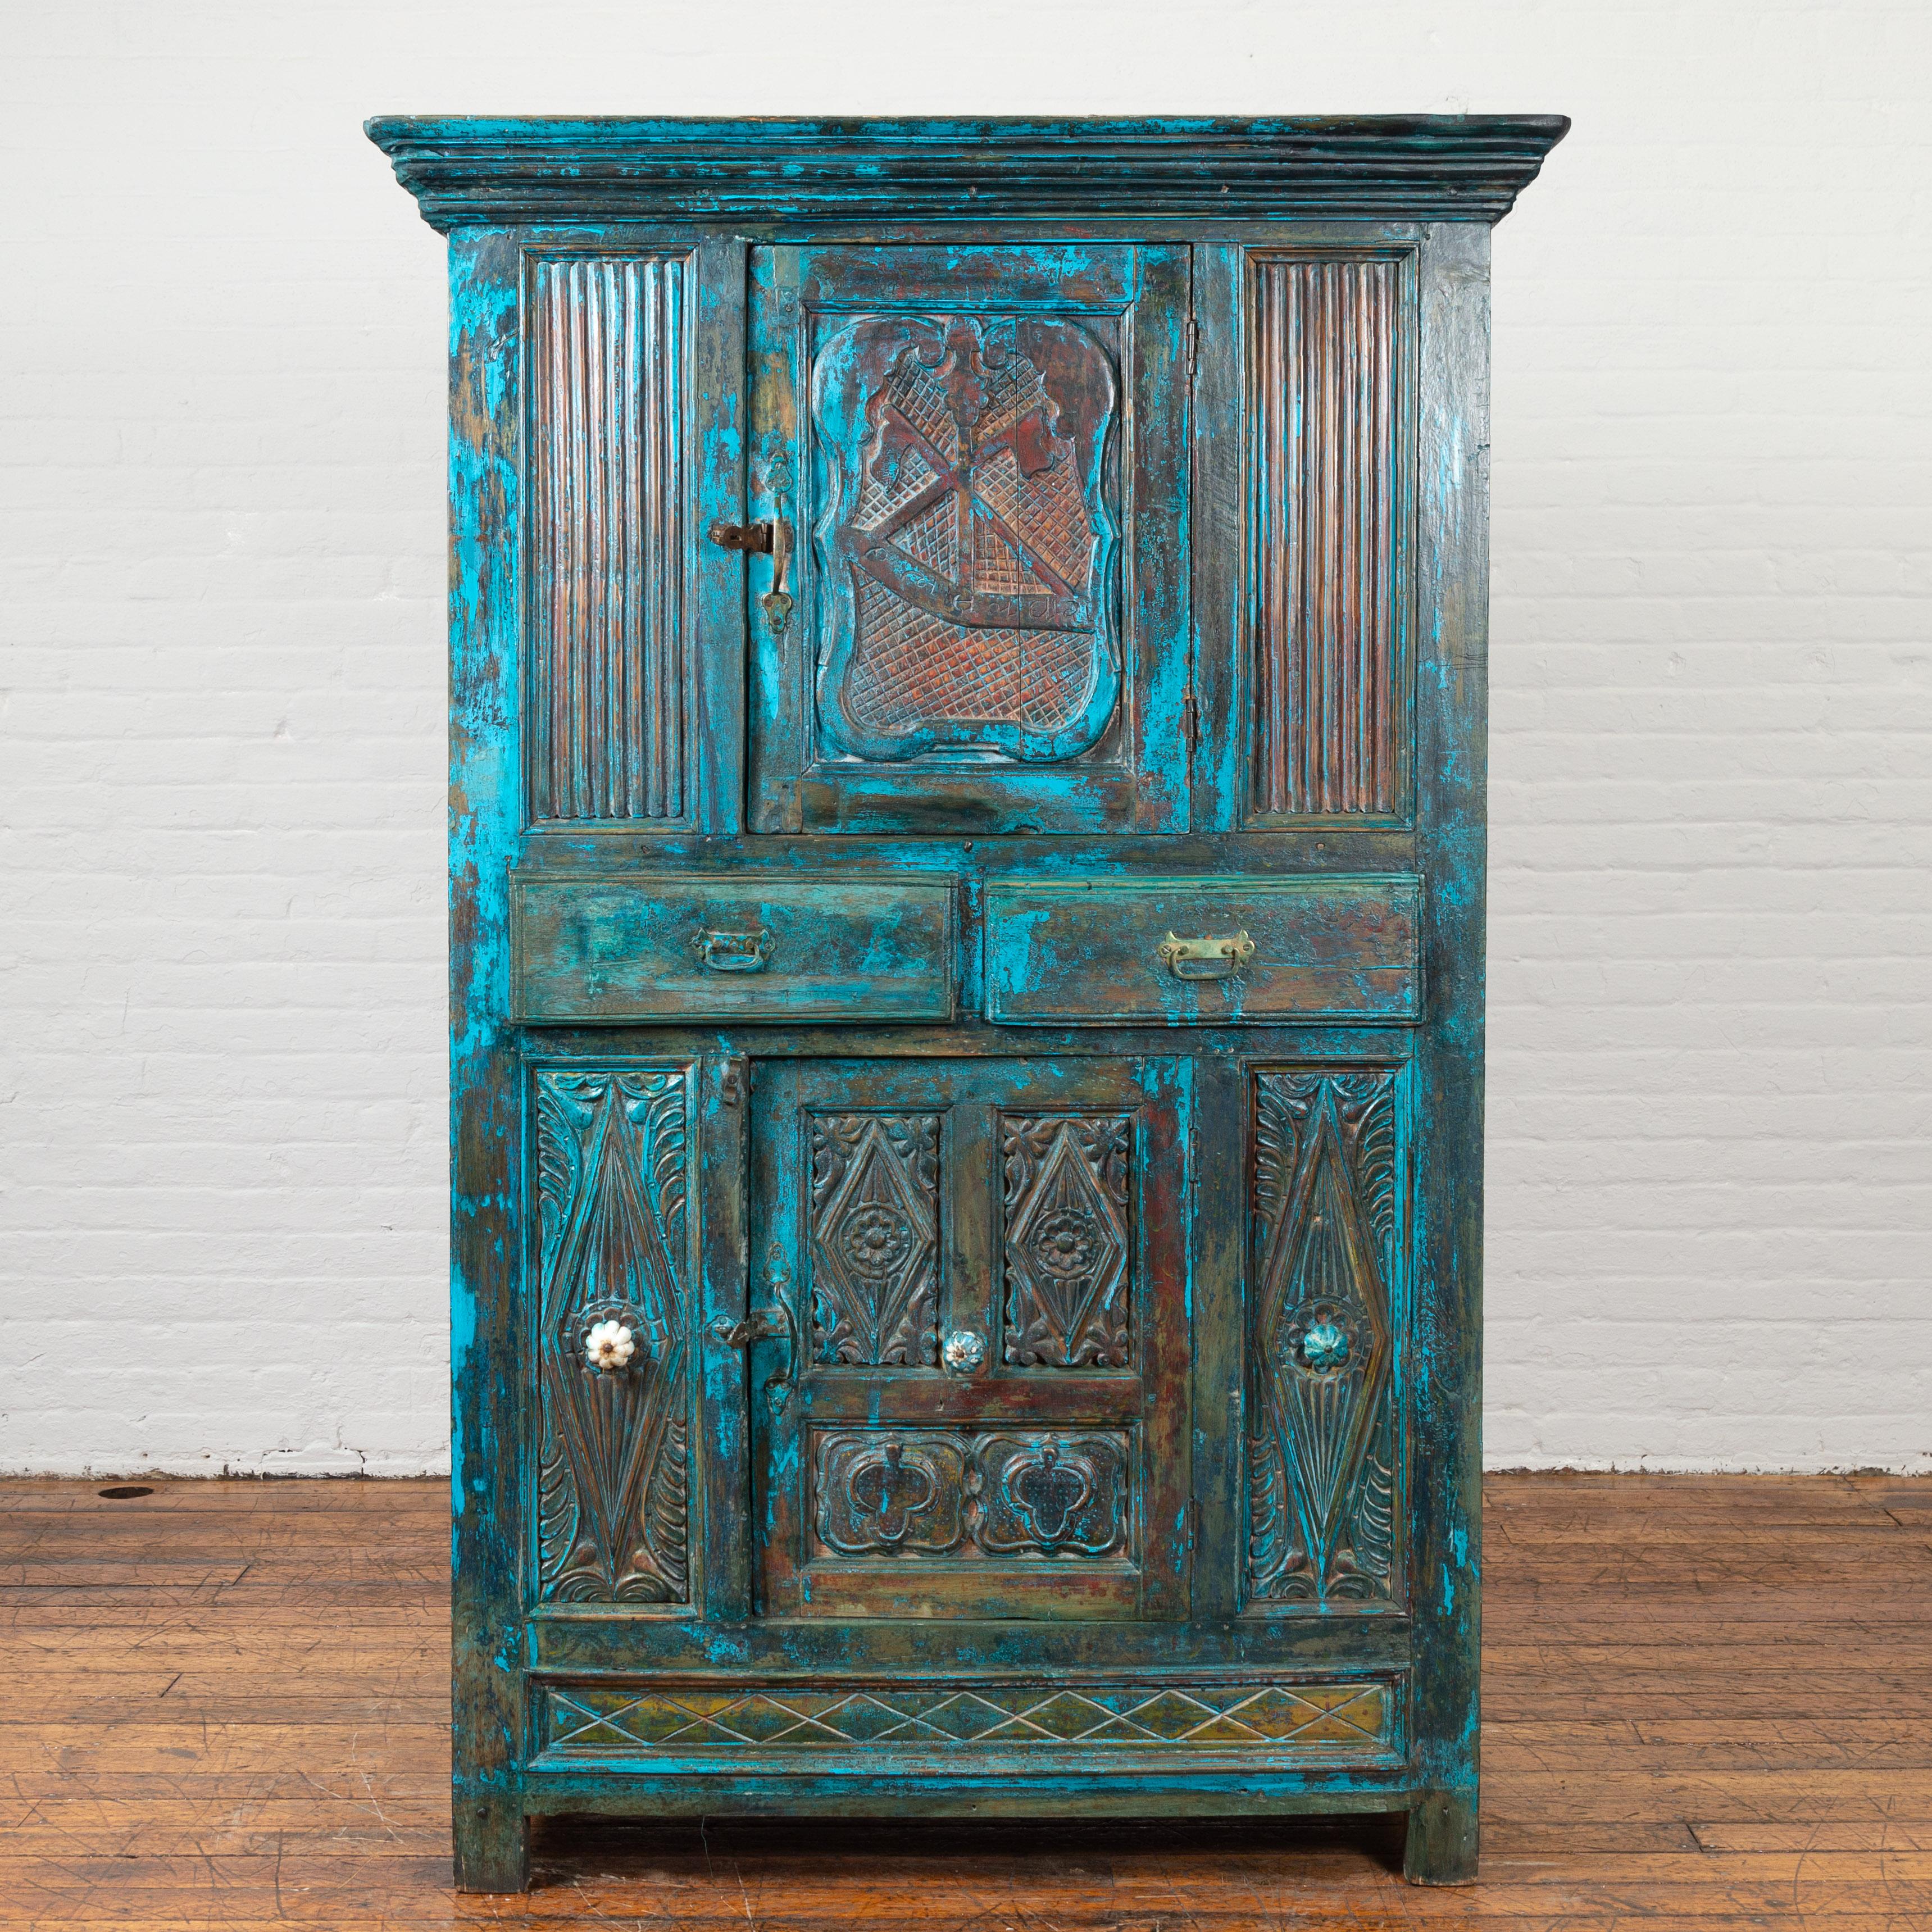 An Indian antique painted cabinet from the 19th century, with royal teal patina, carved doors and drawers. Created in India during the 19th century, this unusual cabinet features a molded cornice sitting above a single cartouche-carved door, flanked